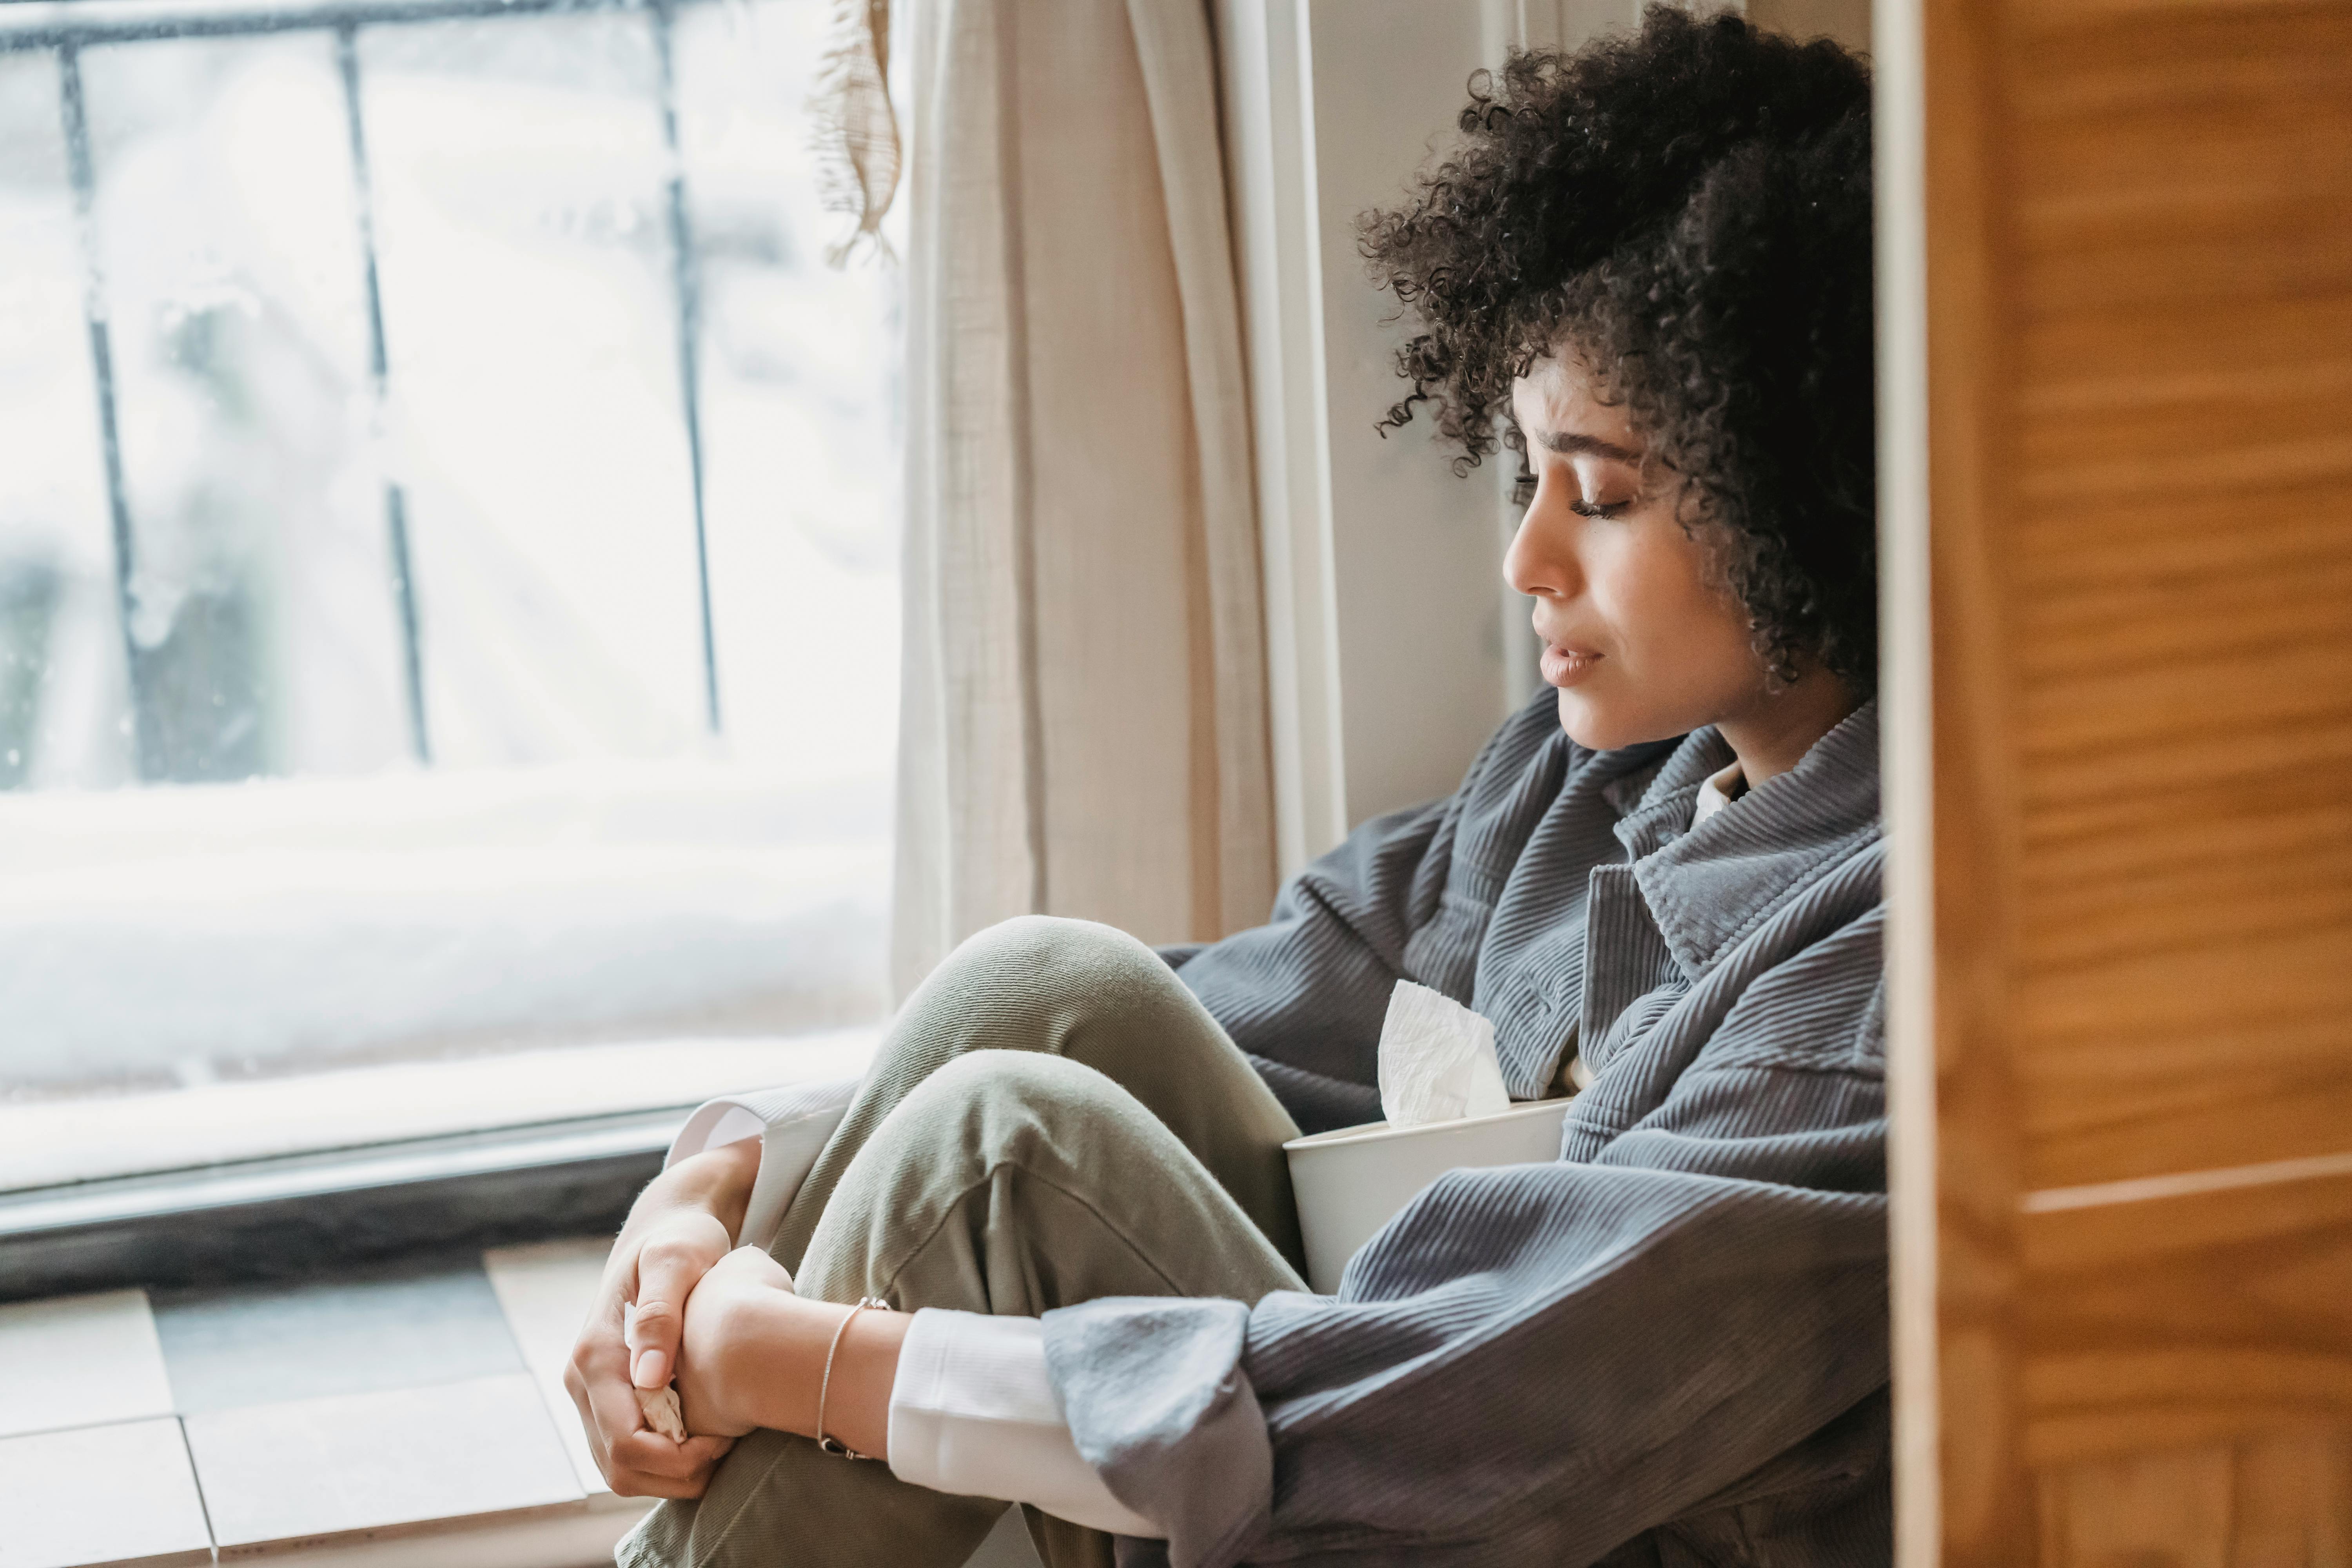 An emotional woman sitting curled up in a corner | Source: Pexels